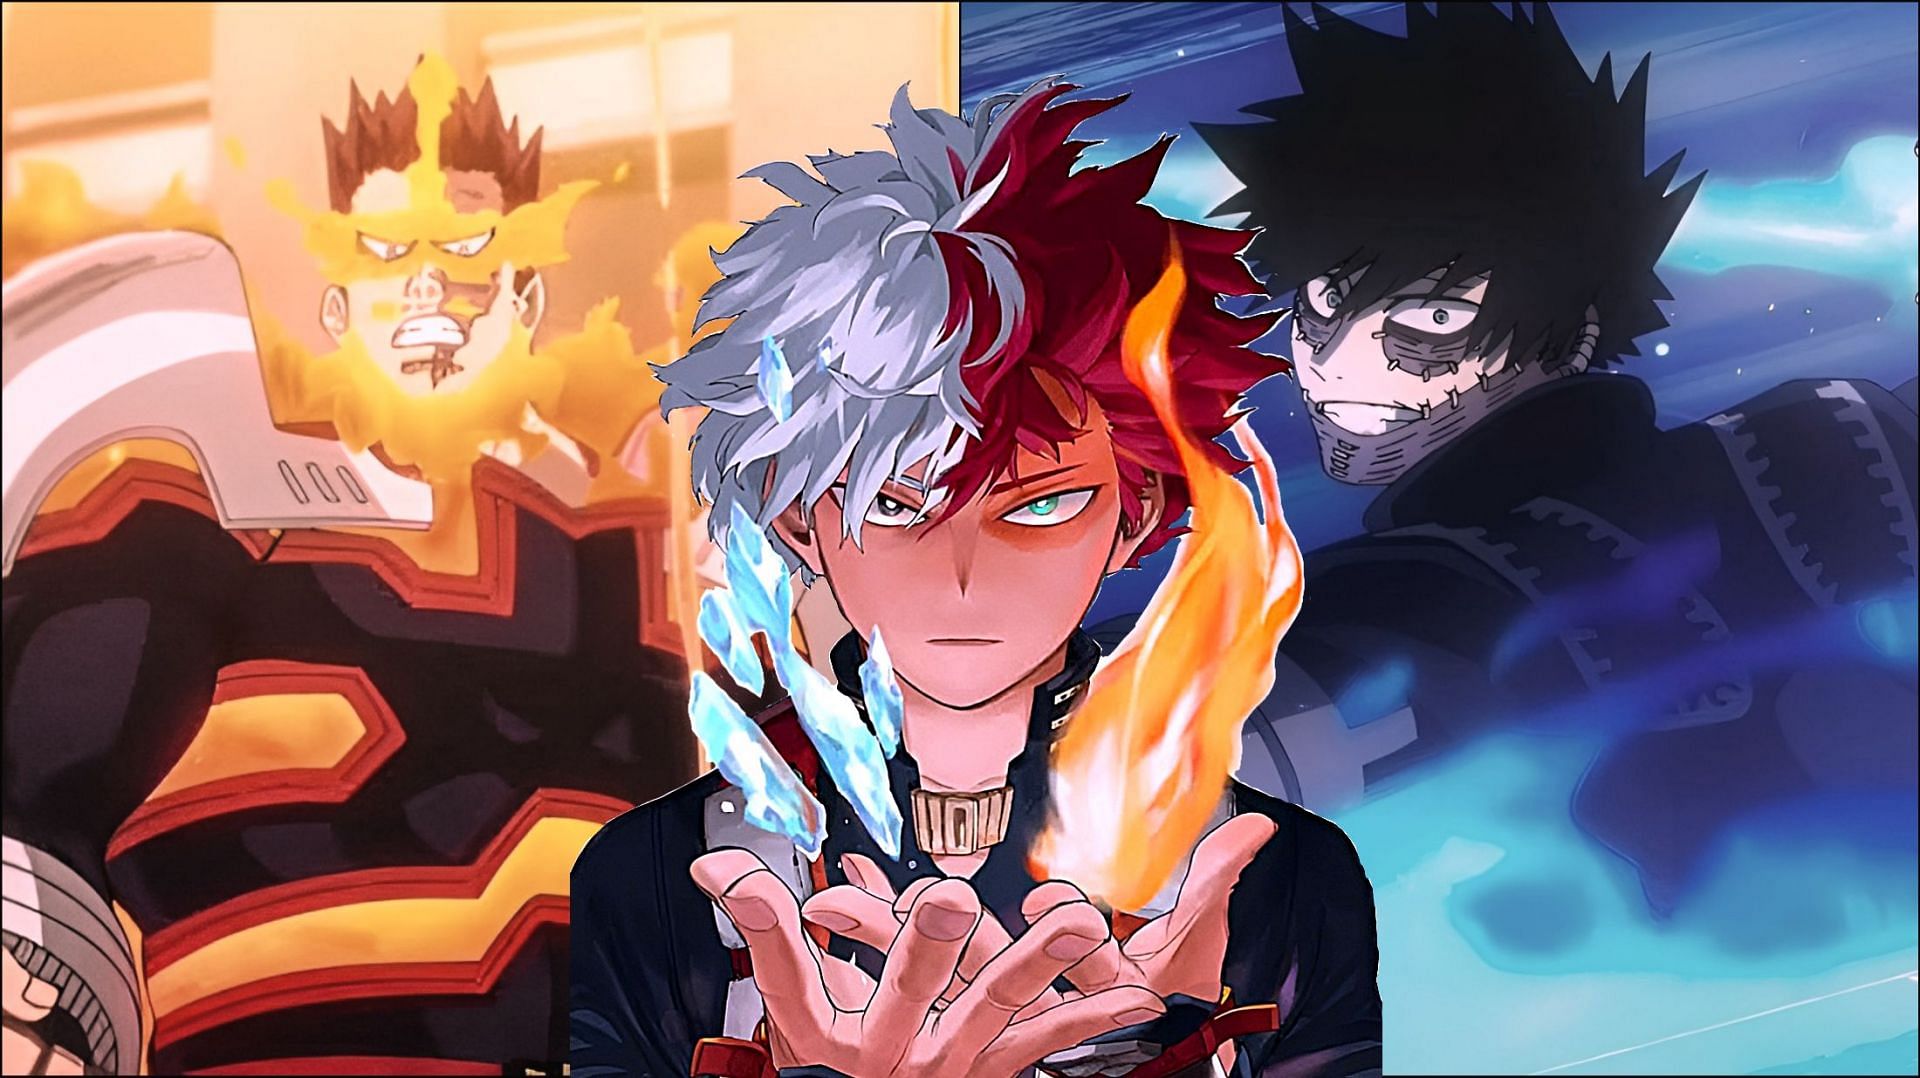 Shoto uses both of his quirks to surpass endeavor and match Dabi (Image via Sportskeeda)